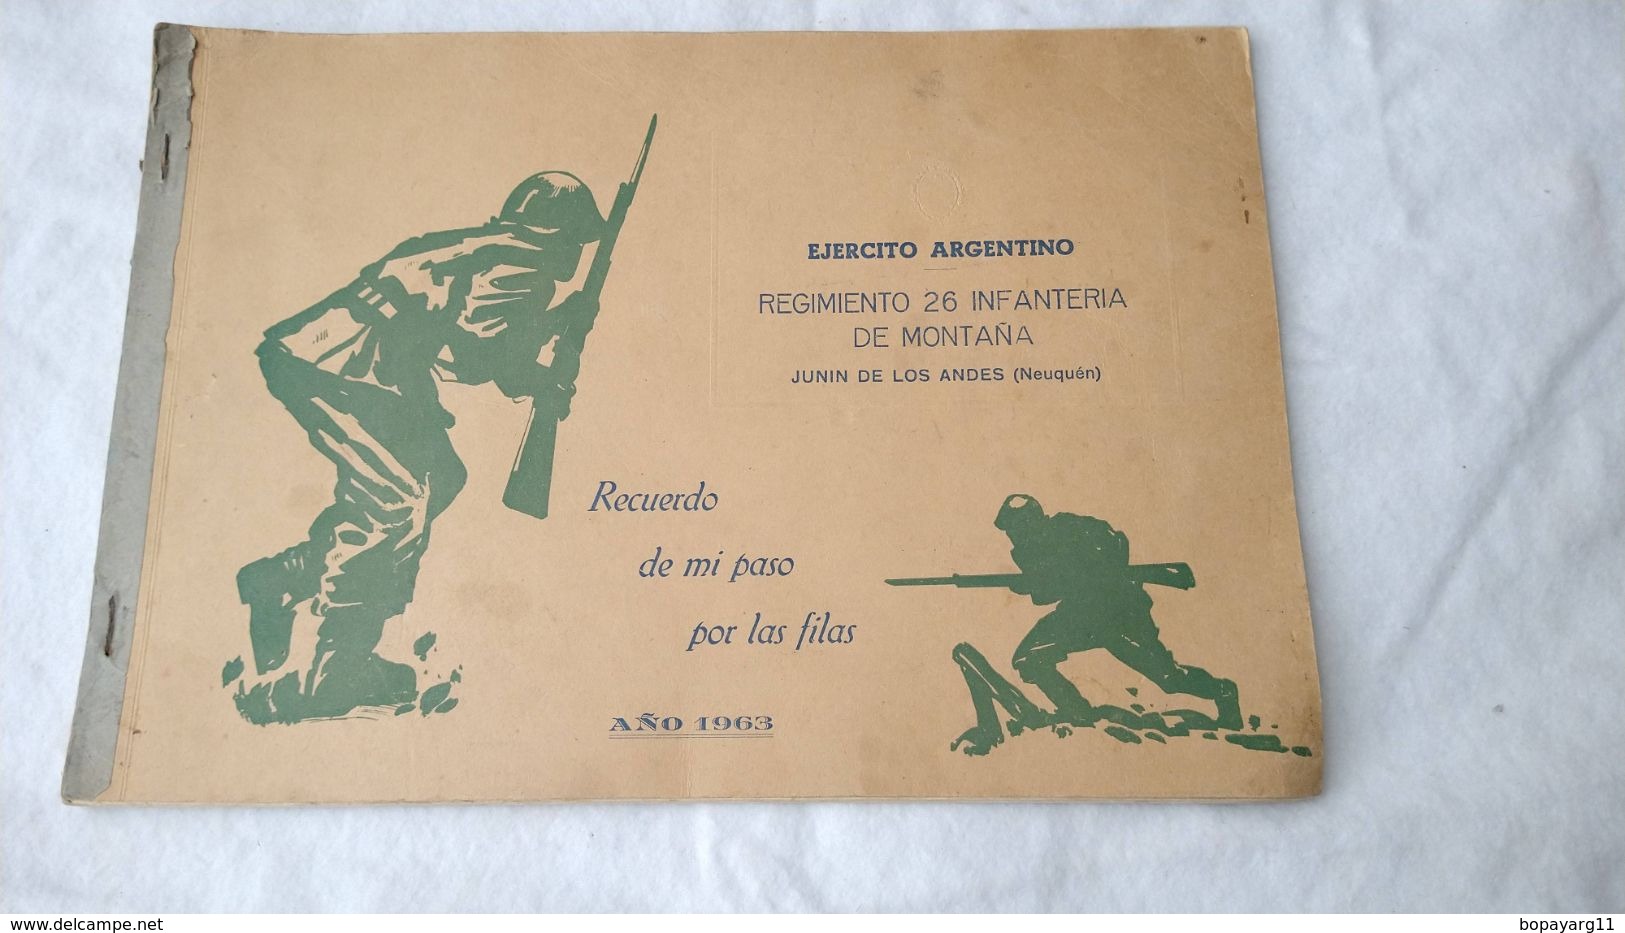 Argentine Army Promotion Photo Book 1963 Military Life Mountain Troops 24 Pages #13 - Español